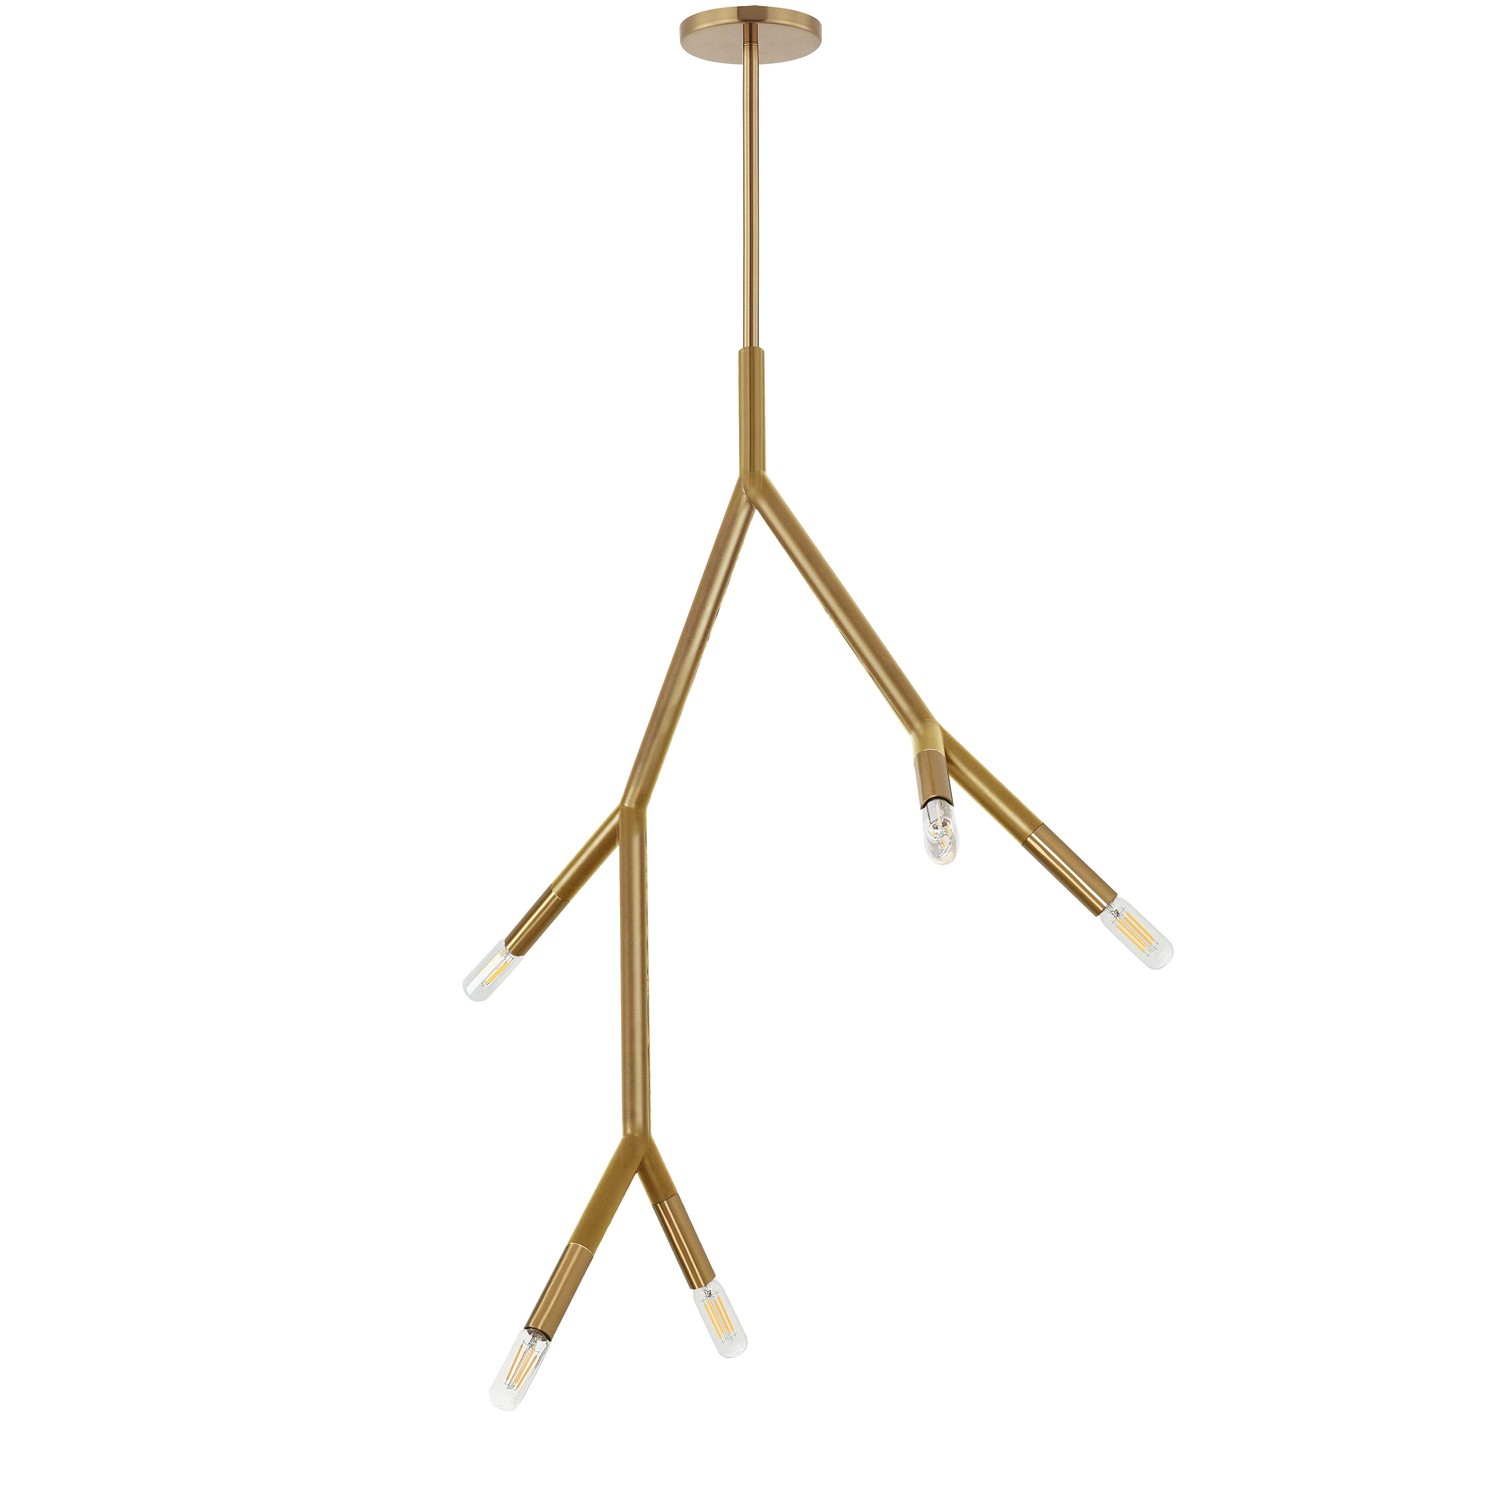 5 Light Incandescent Pendant in Aged Brass